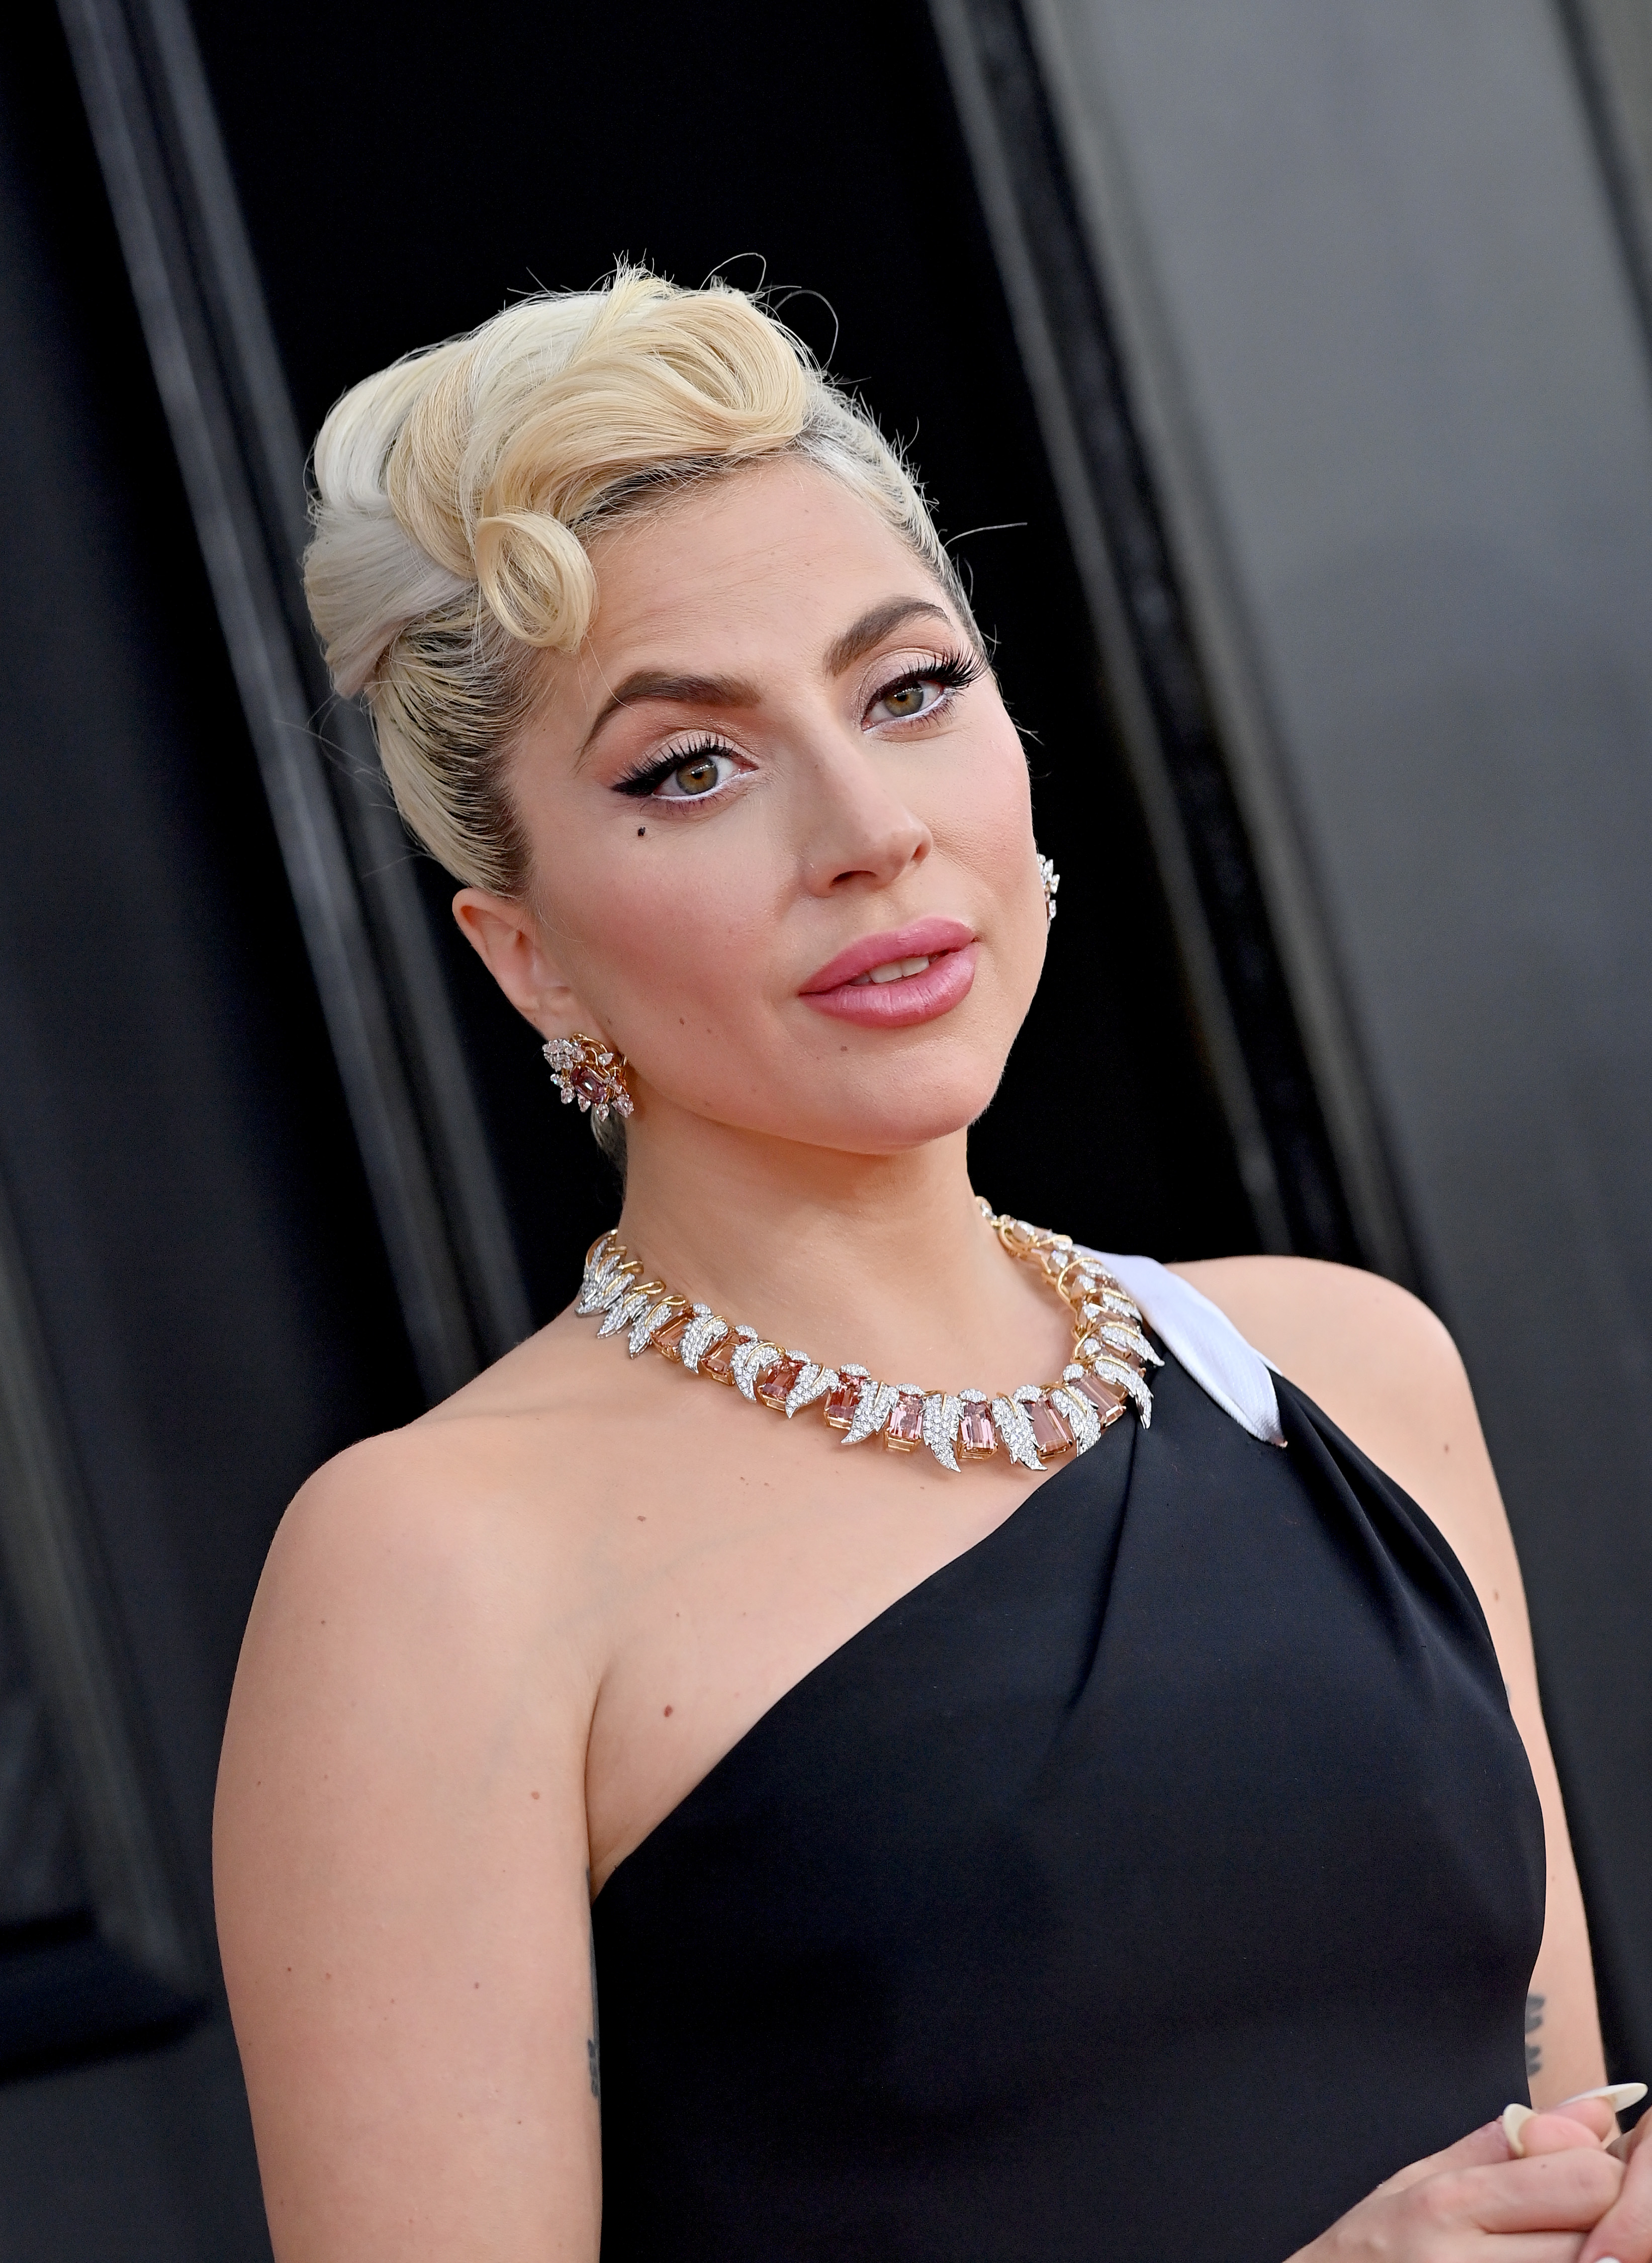 Lady Gaga wears an elegant one-shoulder dress with a statement necklace and earrings at a formal event